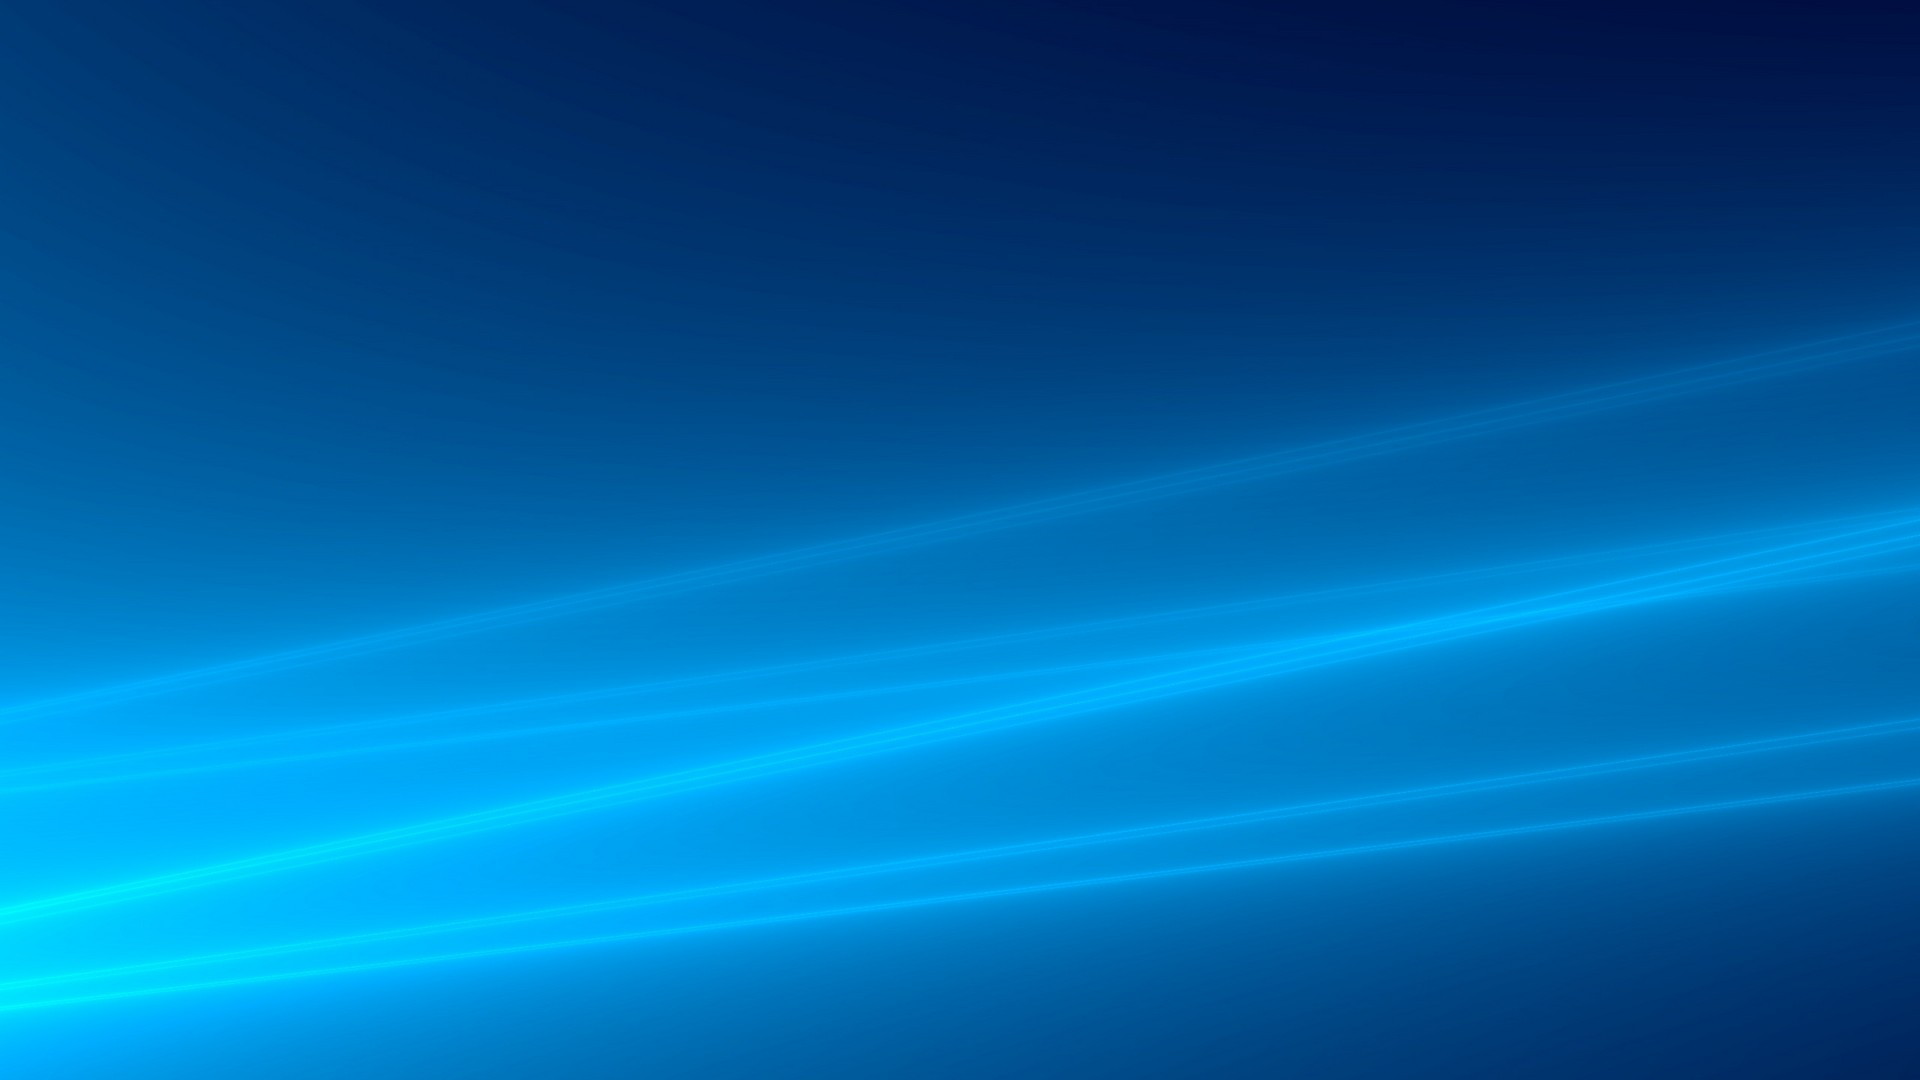 Cool Blue Background Wallpaper HD With high-resolution 1920X1080 pixel. You can use this wallpaper for your Desktop Computer Backgrounds, Mac Wallpapers, Android Lock screen or iPhone Screensavers and another smartphone device